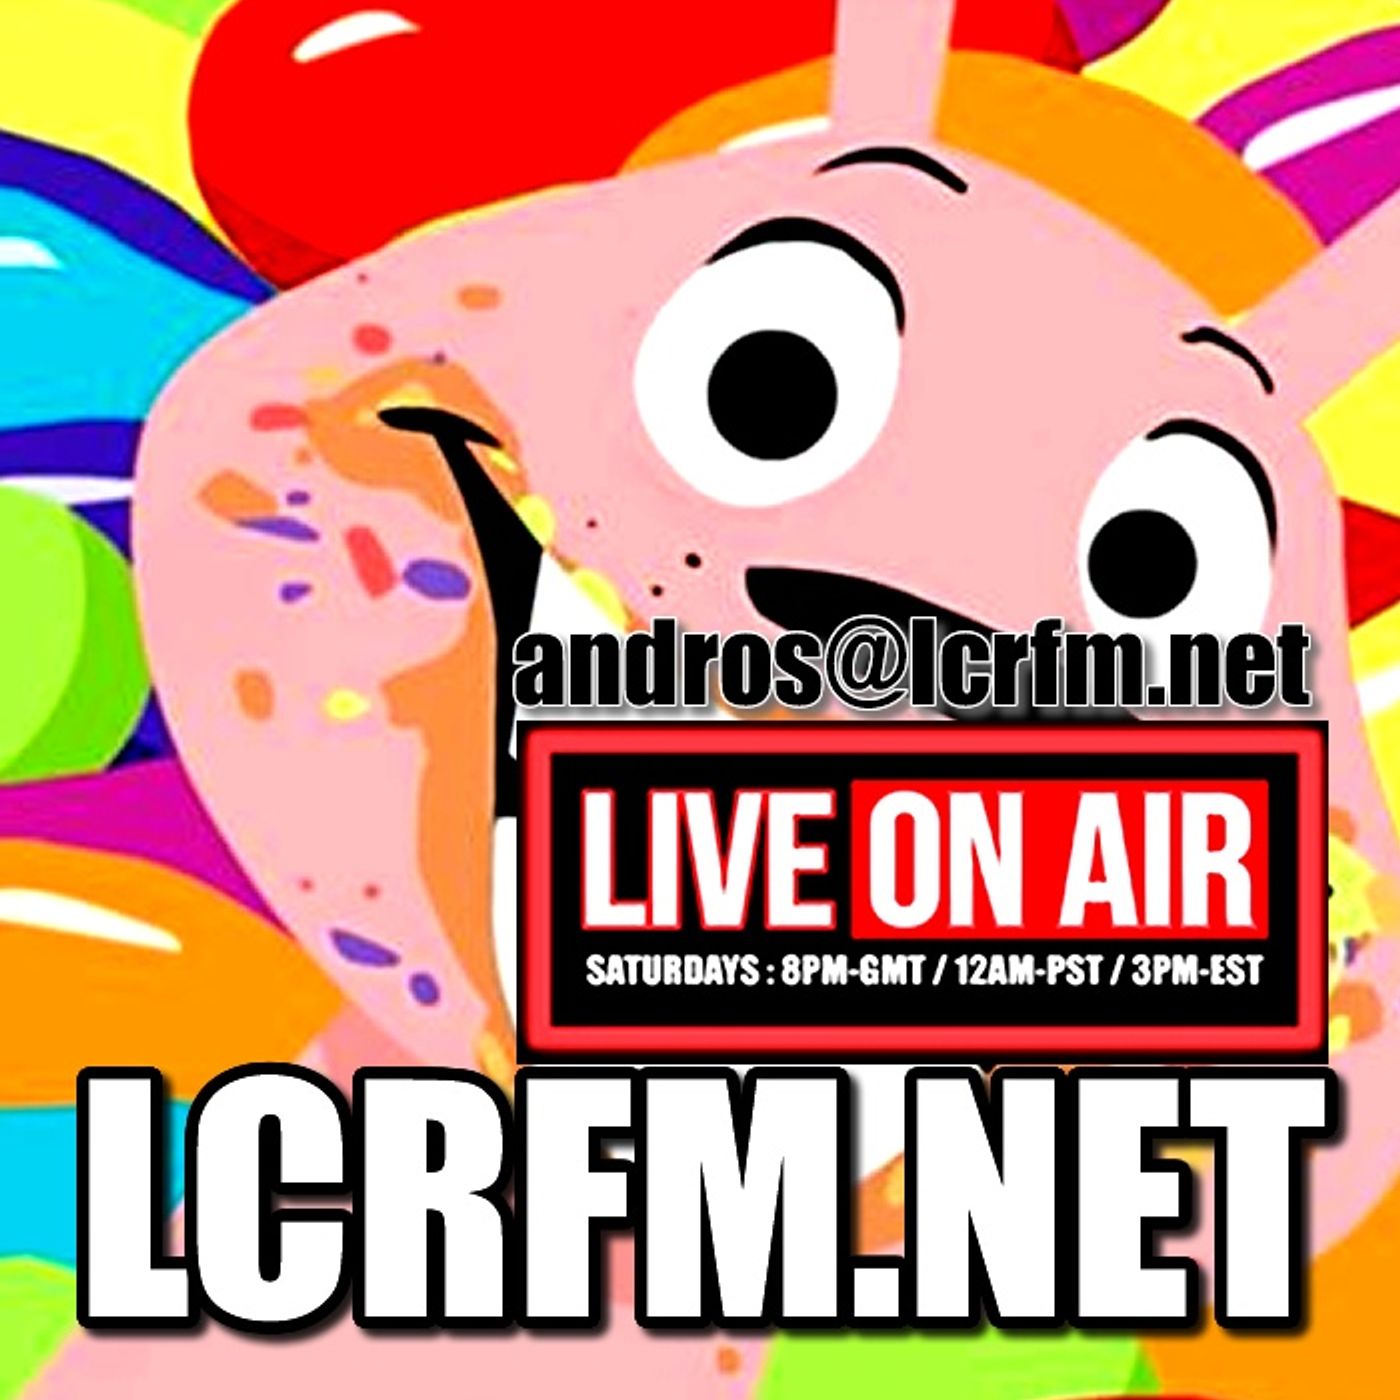 "Im Going to FUNK U This Easter" The London Calling Radio Show on androsgeorgiou. com & lcrfm net